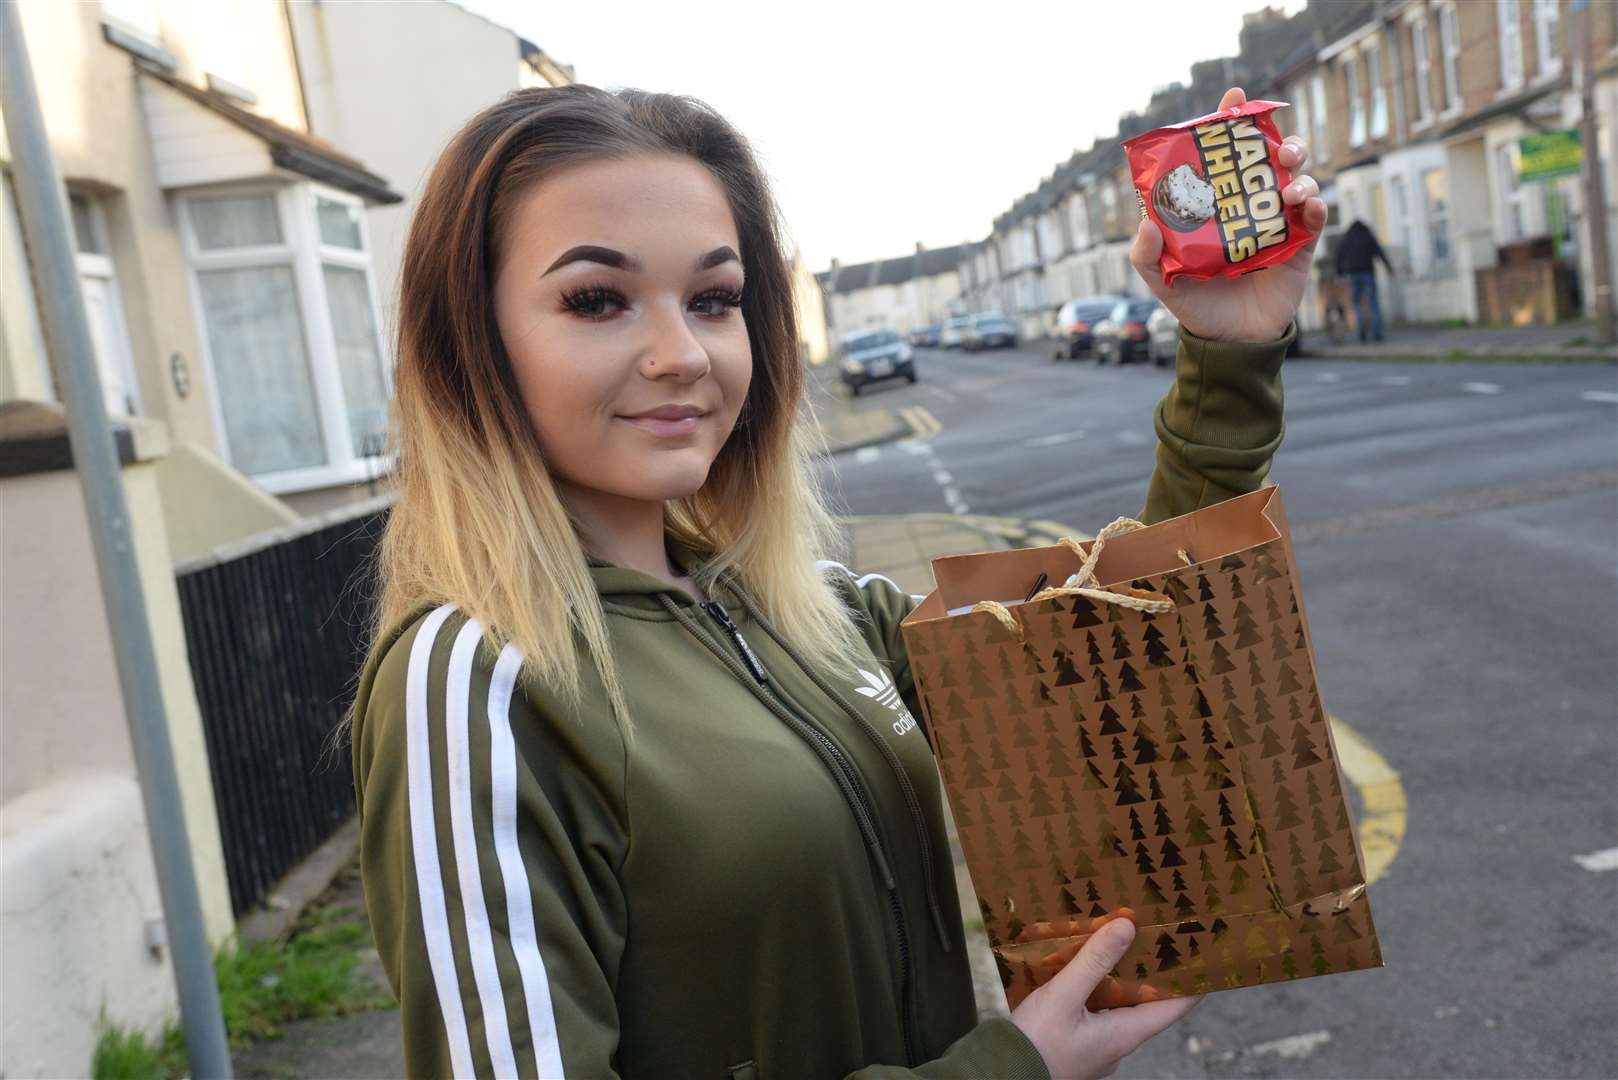 Sharlie Sheney, 17, of May Road, Gillingham, has been delivering presents to the homeless. Picture: Chris Davey